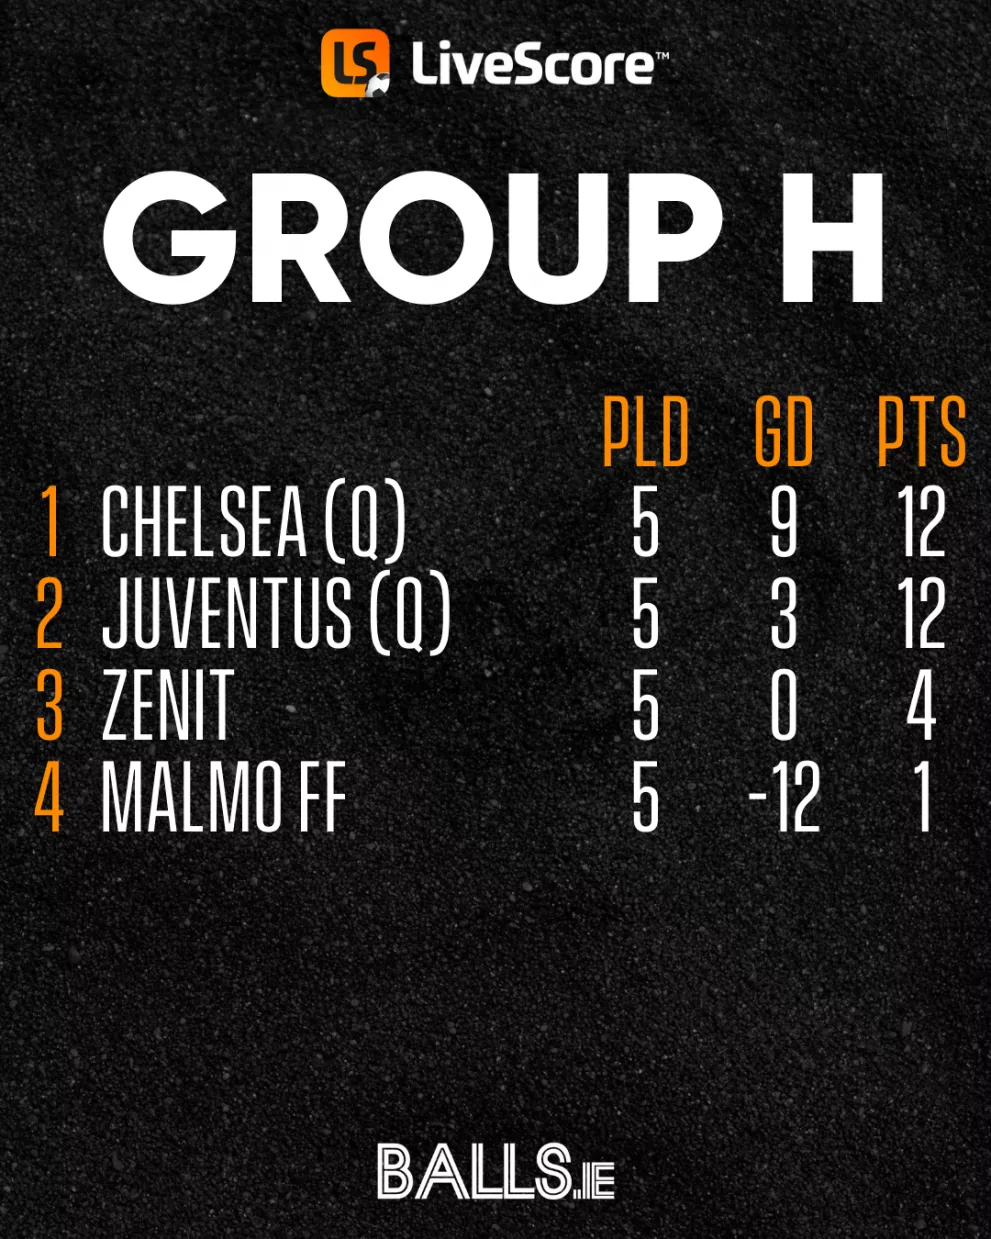 UCL group H